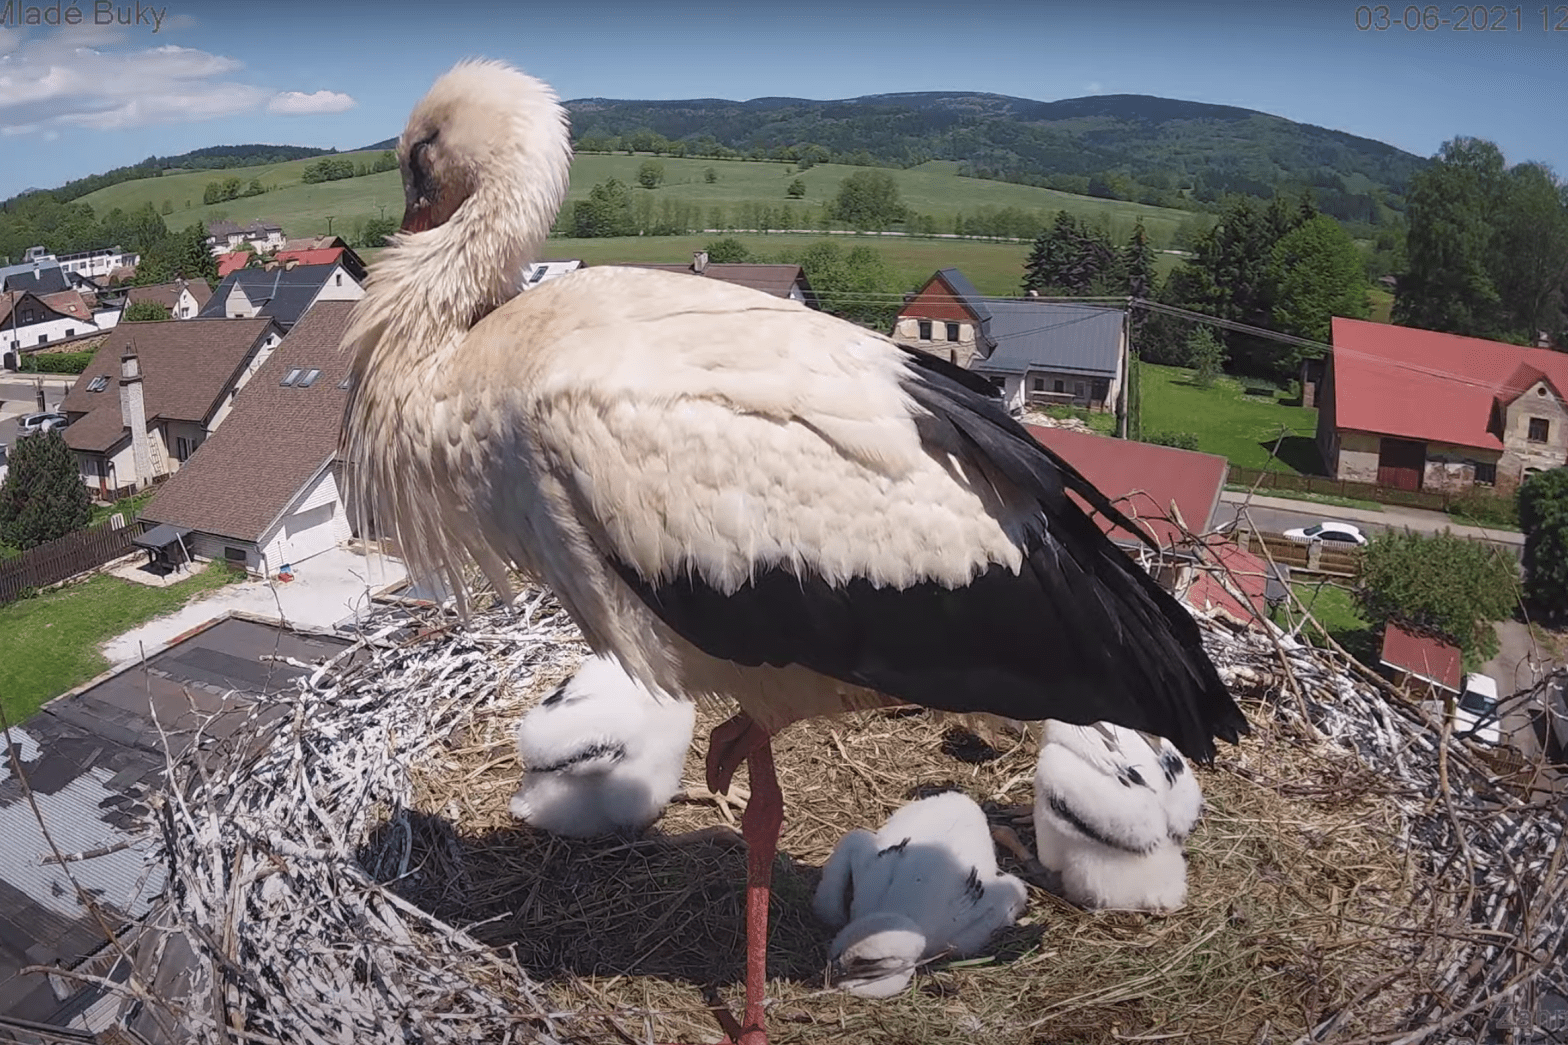 storks at Mlade Buky are growing – Mary Ann Steggles